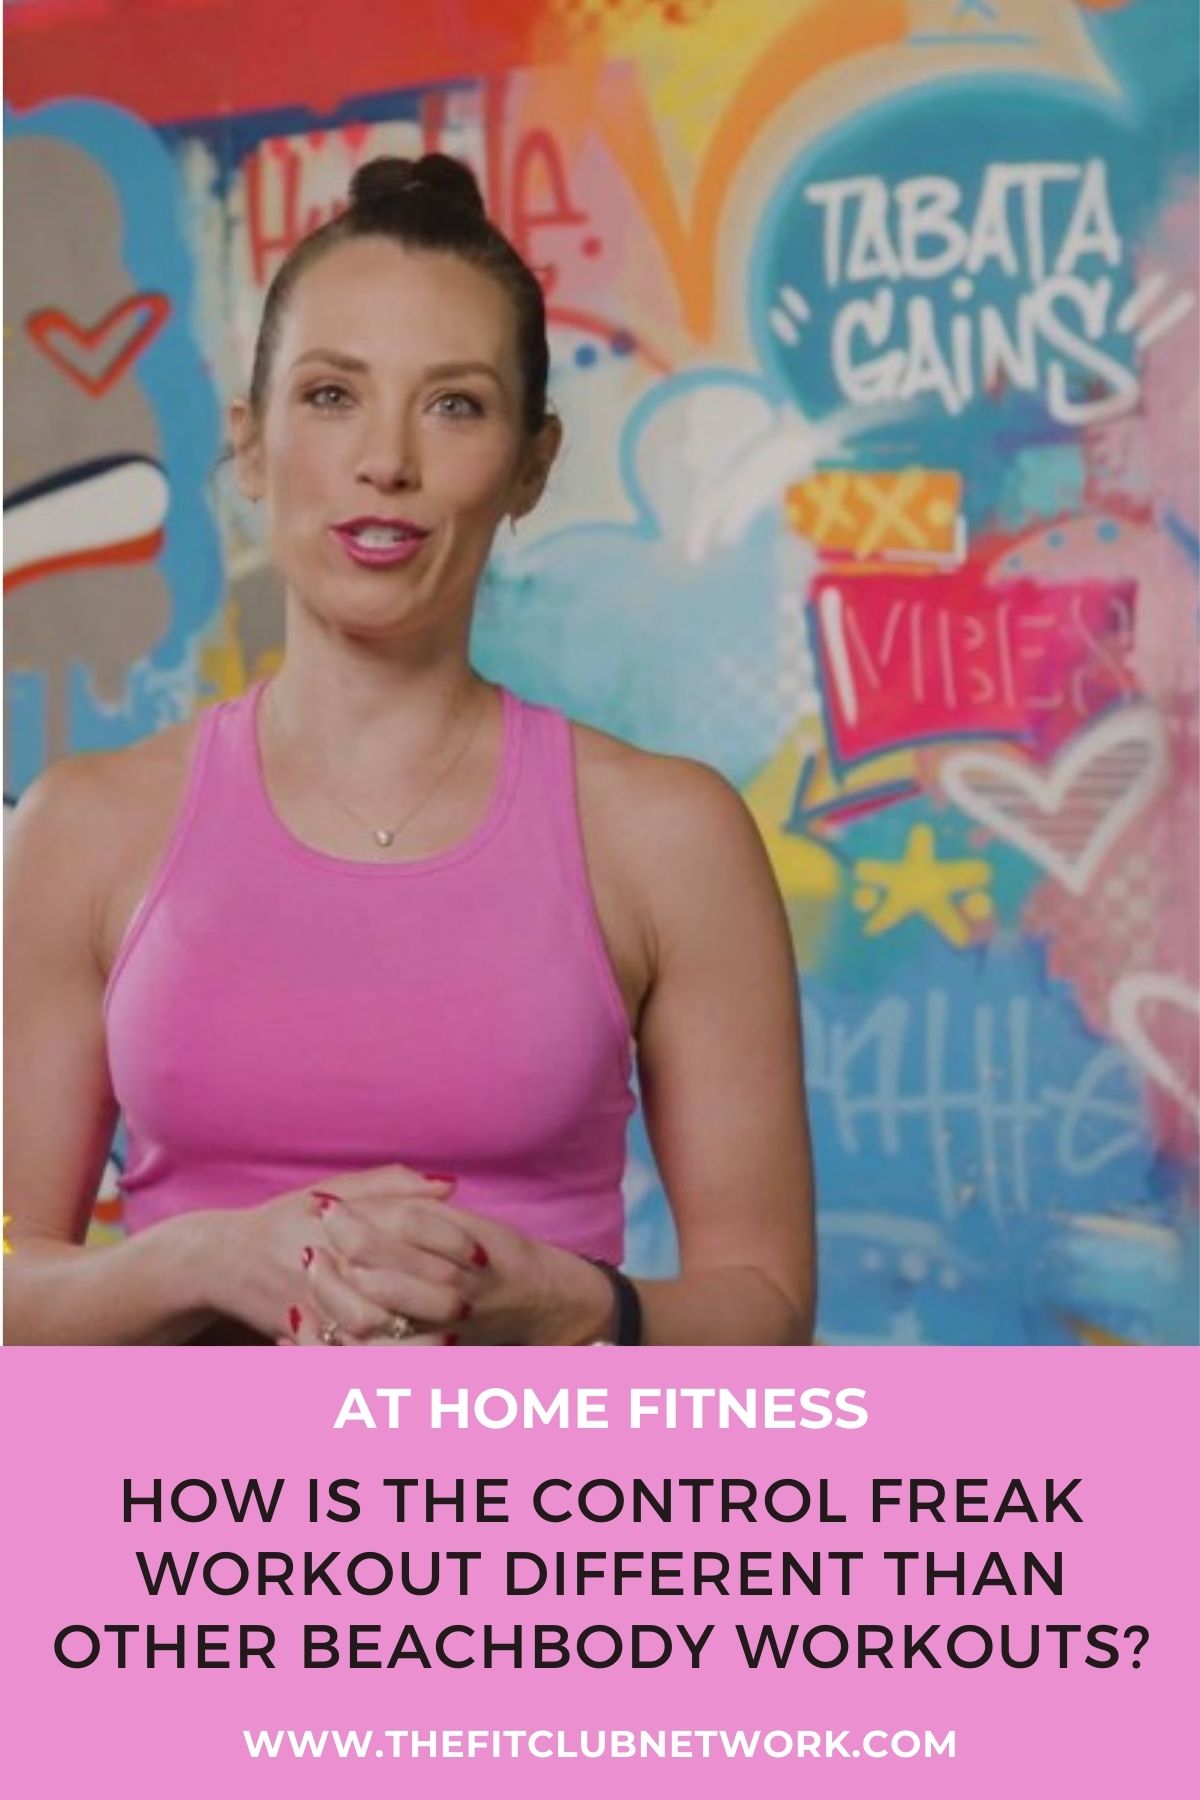 How is the Control Freak Workout Different Than Other Beachbody Workouts? | THEFITCLUBNETWORK.COM